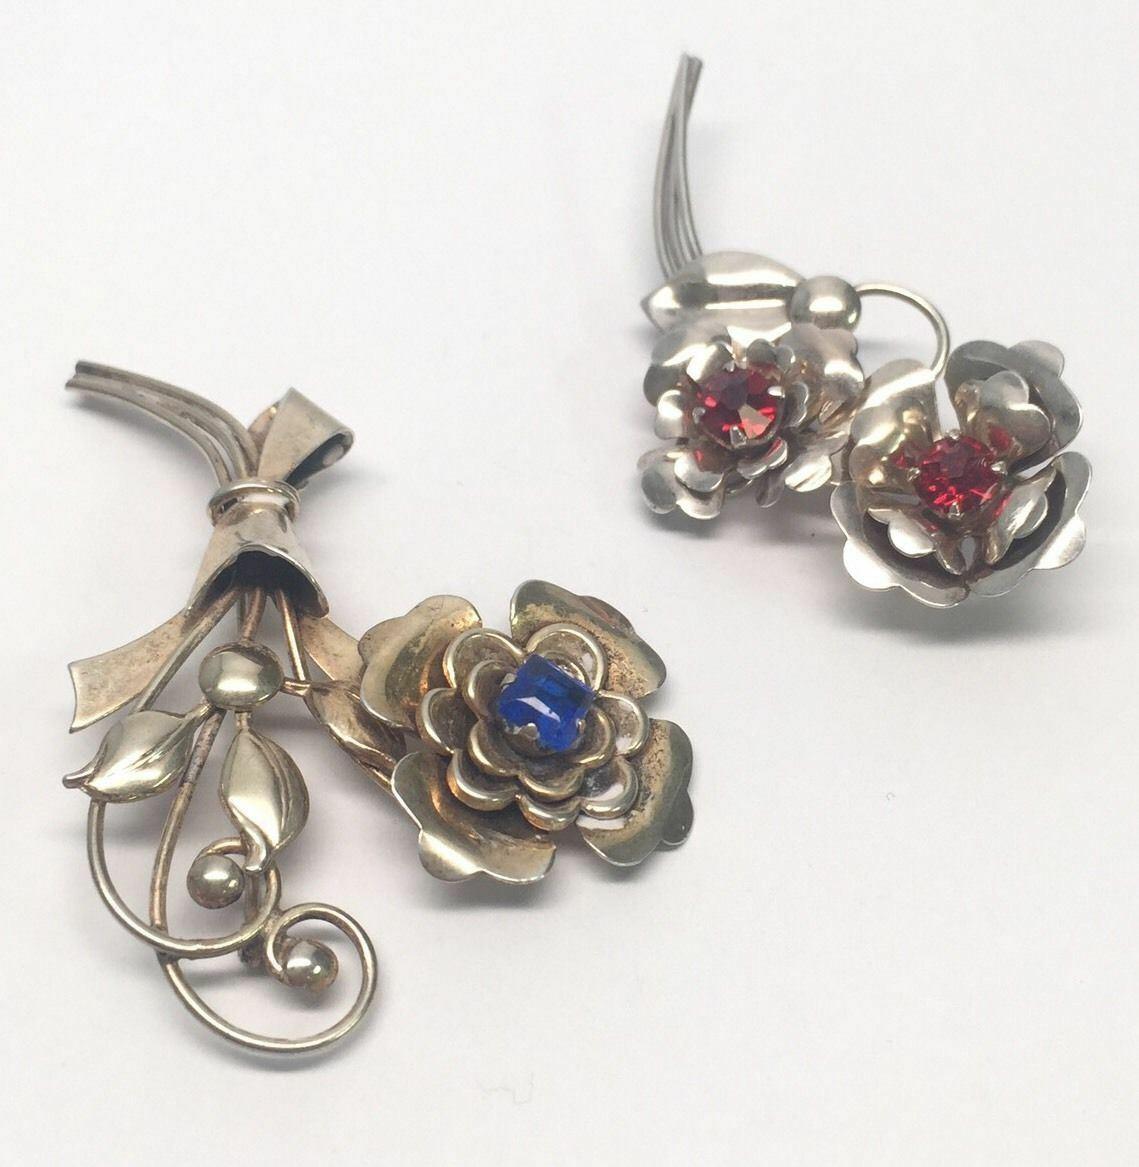 Harry Iskin 1940s Sterling Silver Pair of Flower Brooches / Pins 3